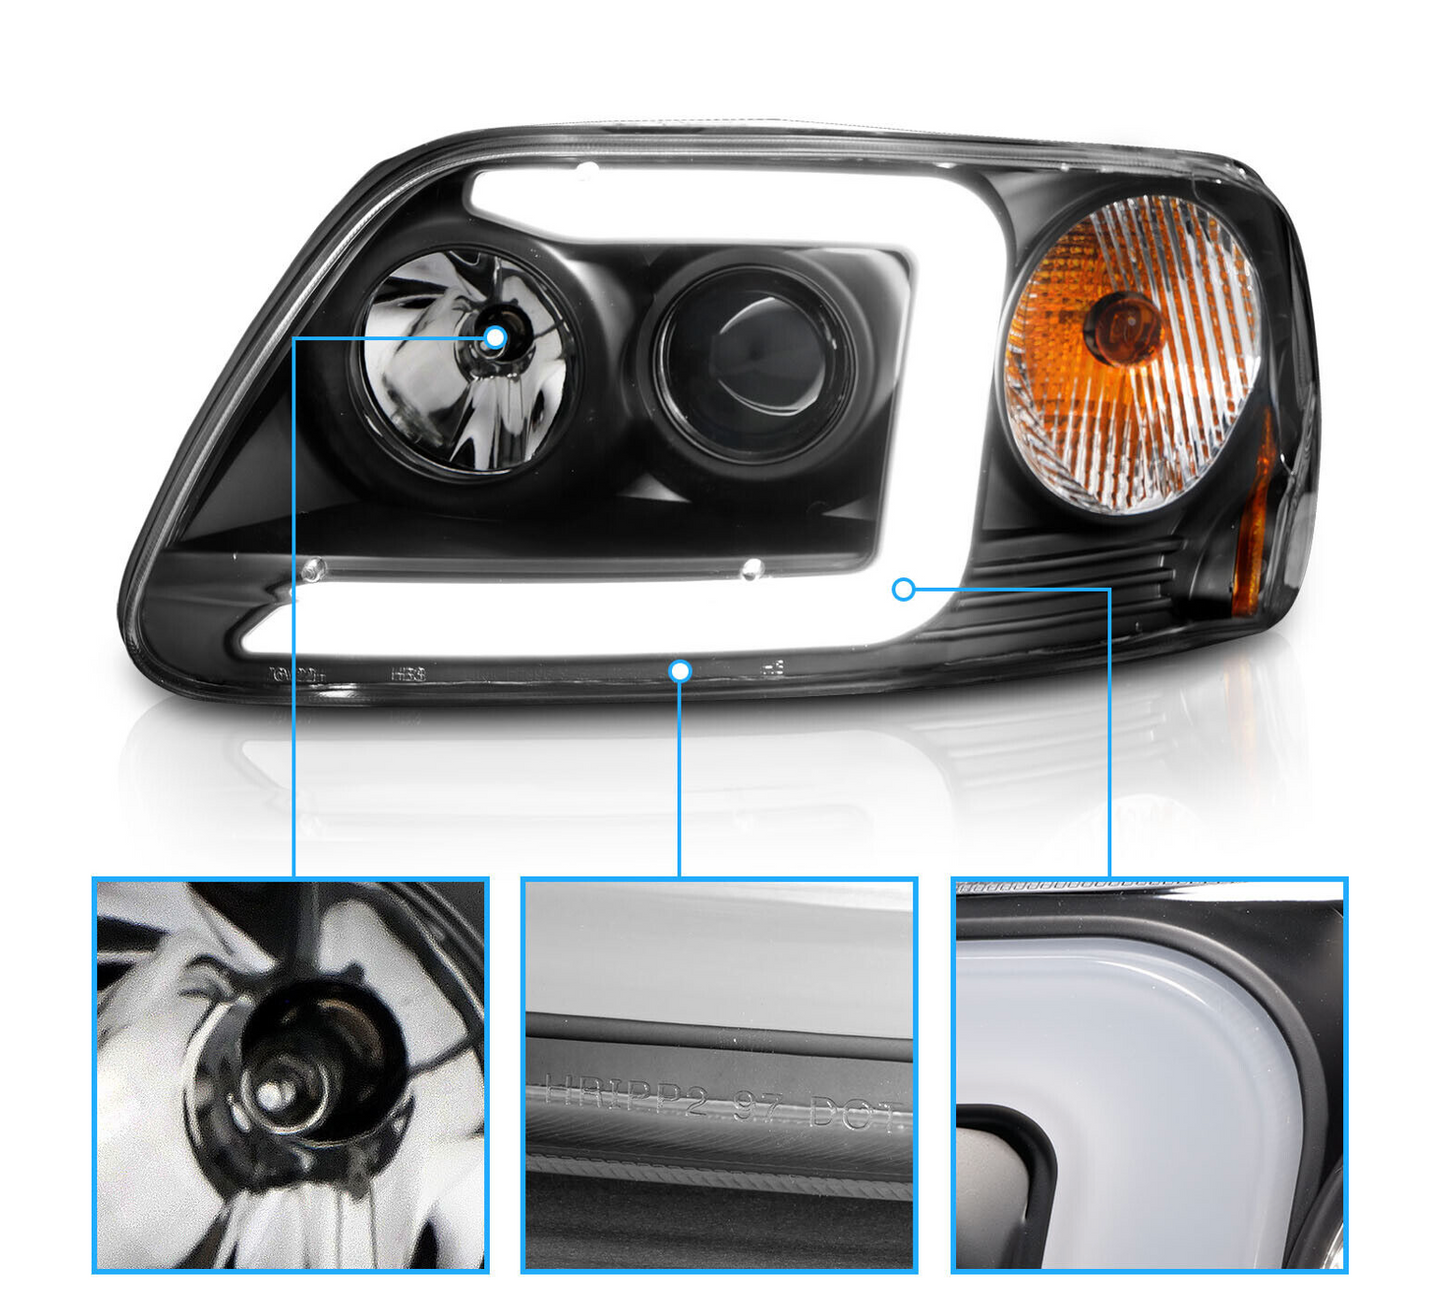 1997-2003 Ford F150 Bar Style Halo Projector Headlights